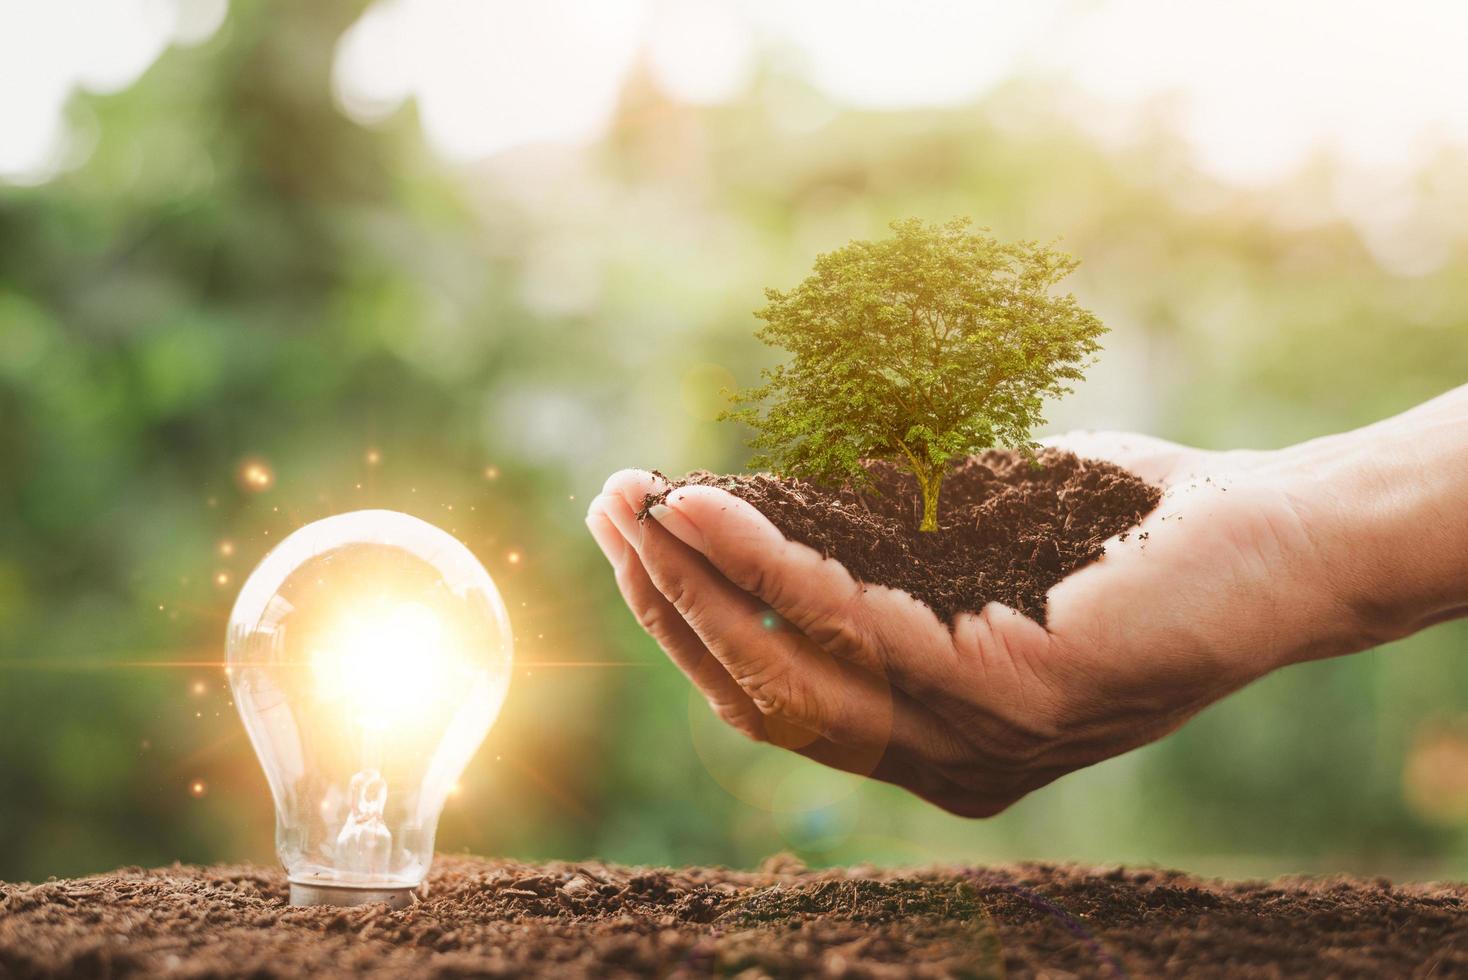 protecting the environment alternative energy Sustainable renewable energy sources Green energy innovation and environmentally friendly energy technology,tree is in the hand and the bulb is in soil. photo